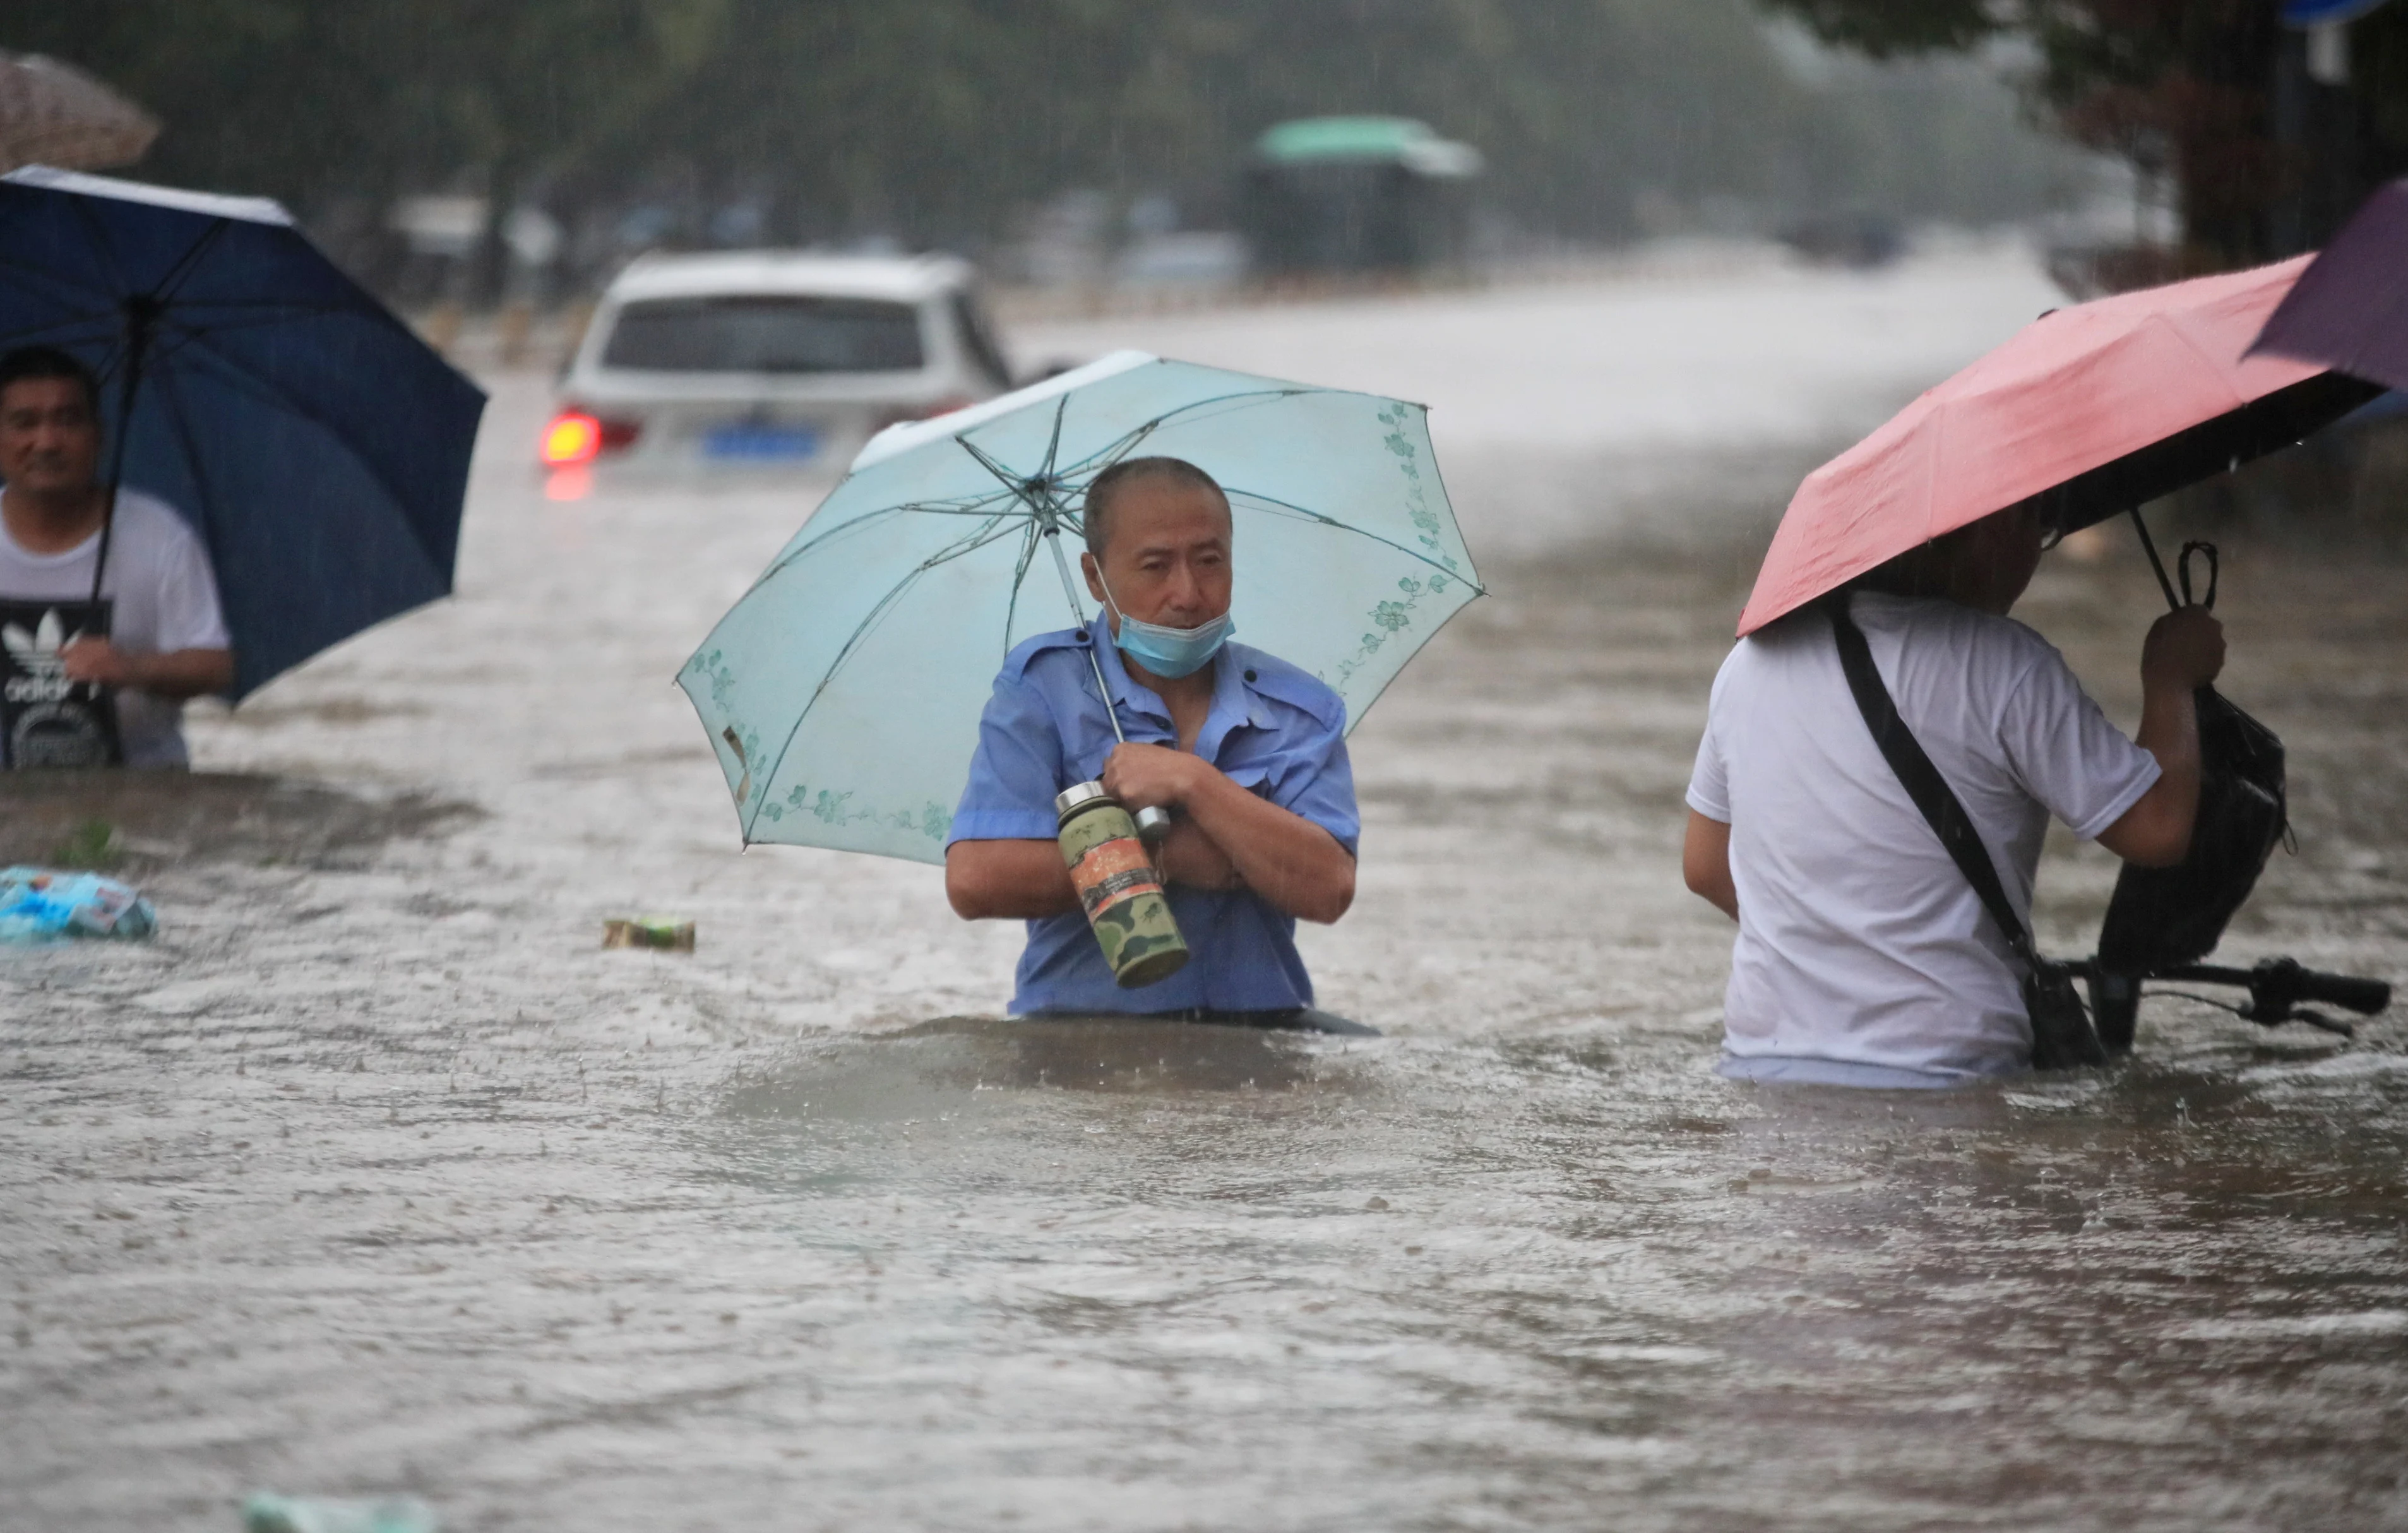 Residents wade through floodwaters on a flooded road amid heavy rainfall in Zhengzhou, Henan province, China July 20, 2021. China Daily via REUTERS